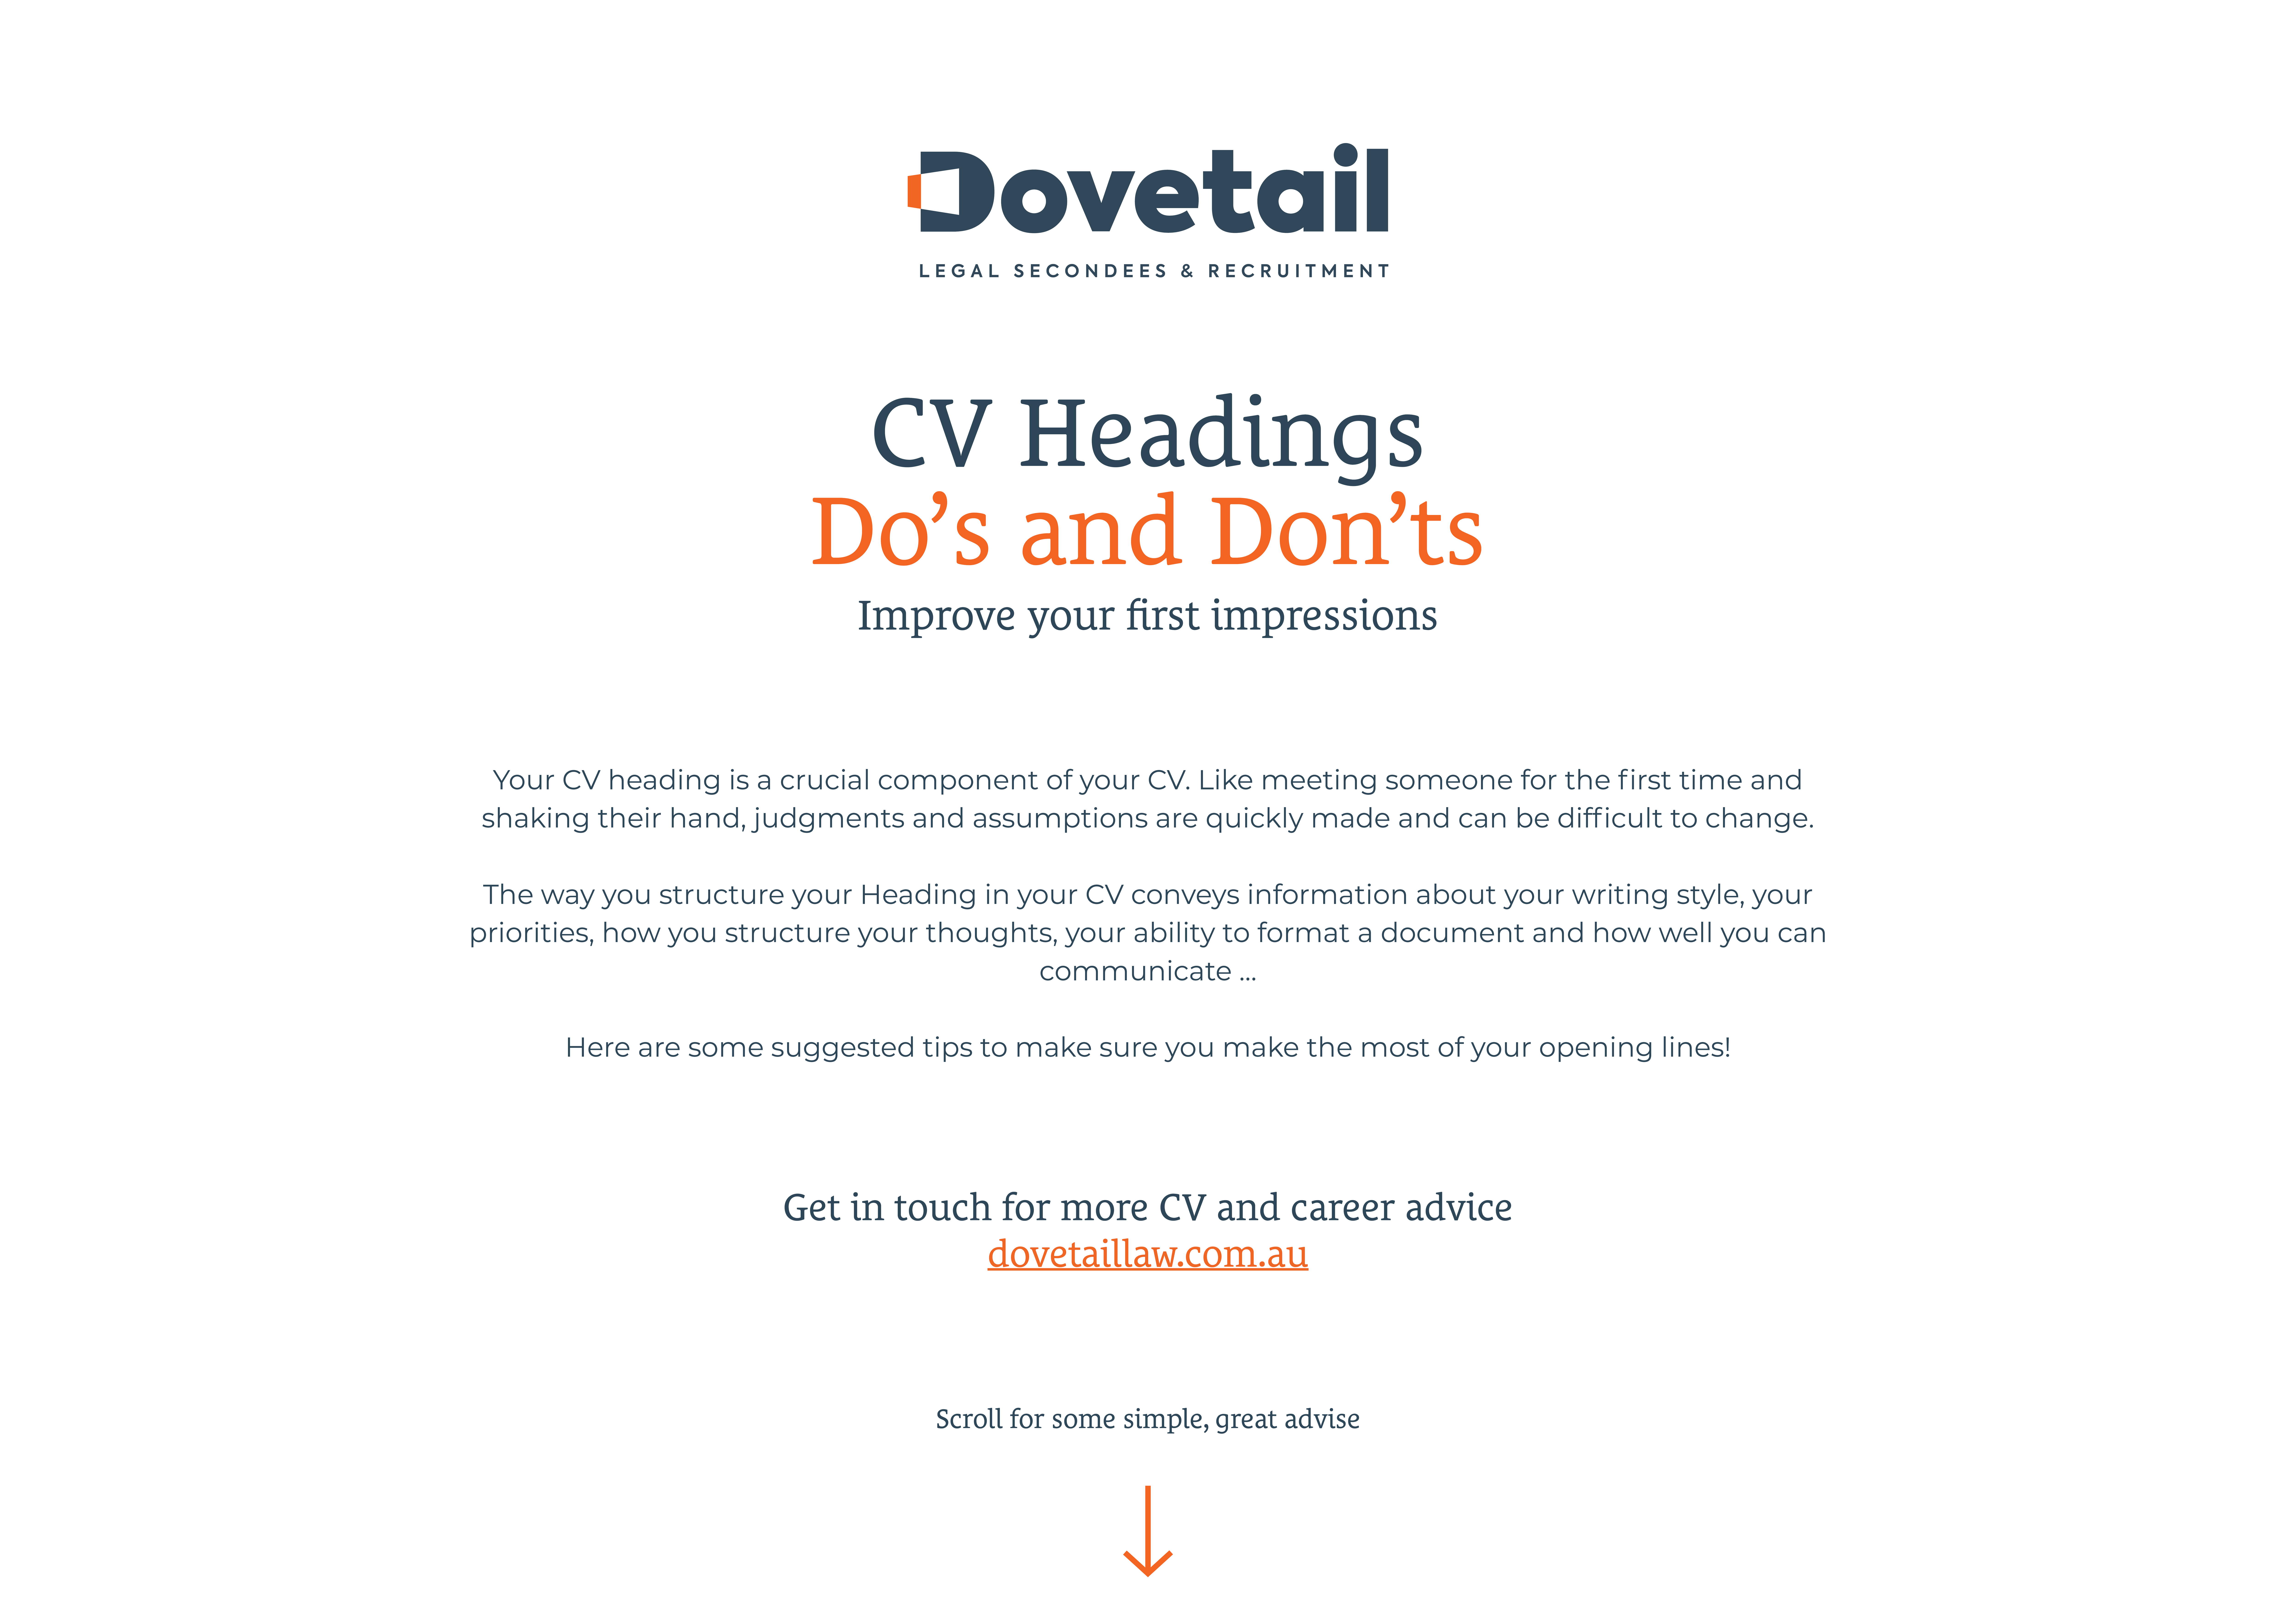 Do's and Don'ts for CV headings